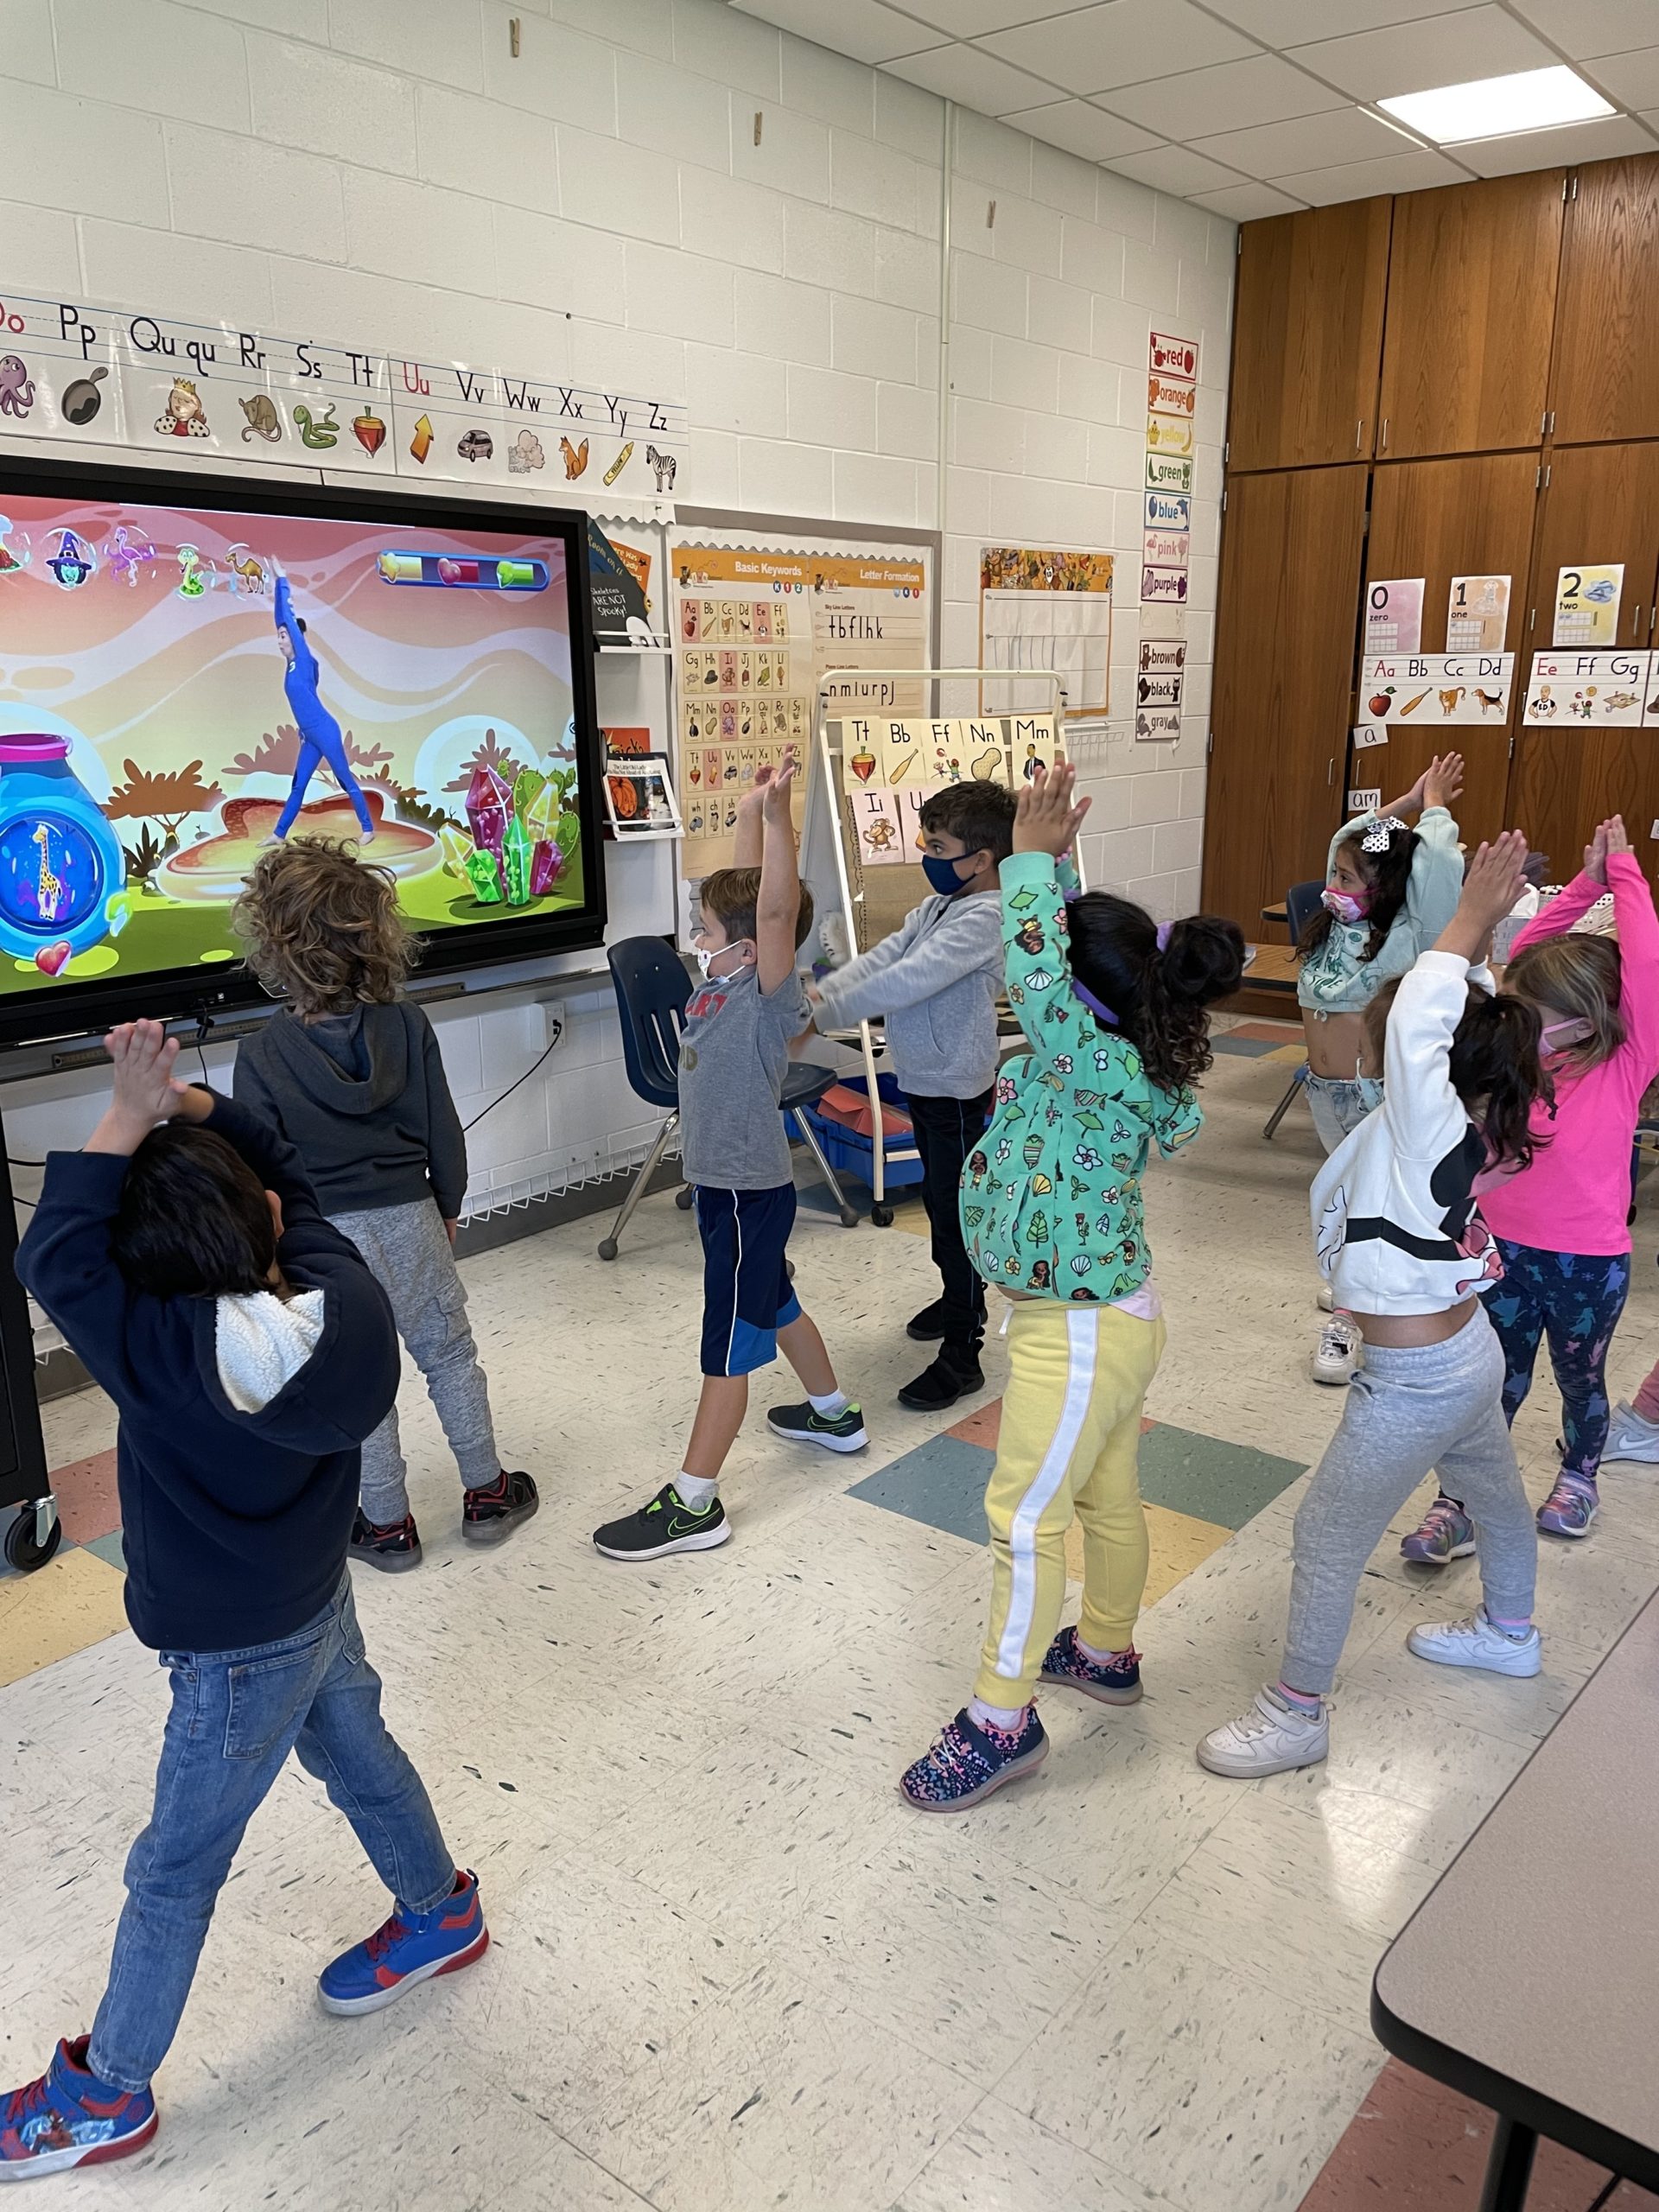 Children in Ms. Bonner's kindergarten class in East Quogue get time for doing yoga and for exploring the school garden, activities teachers and others who work with children say are helpful in maintaining mental and emotional well being.